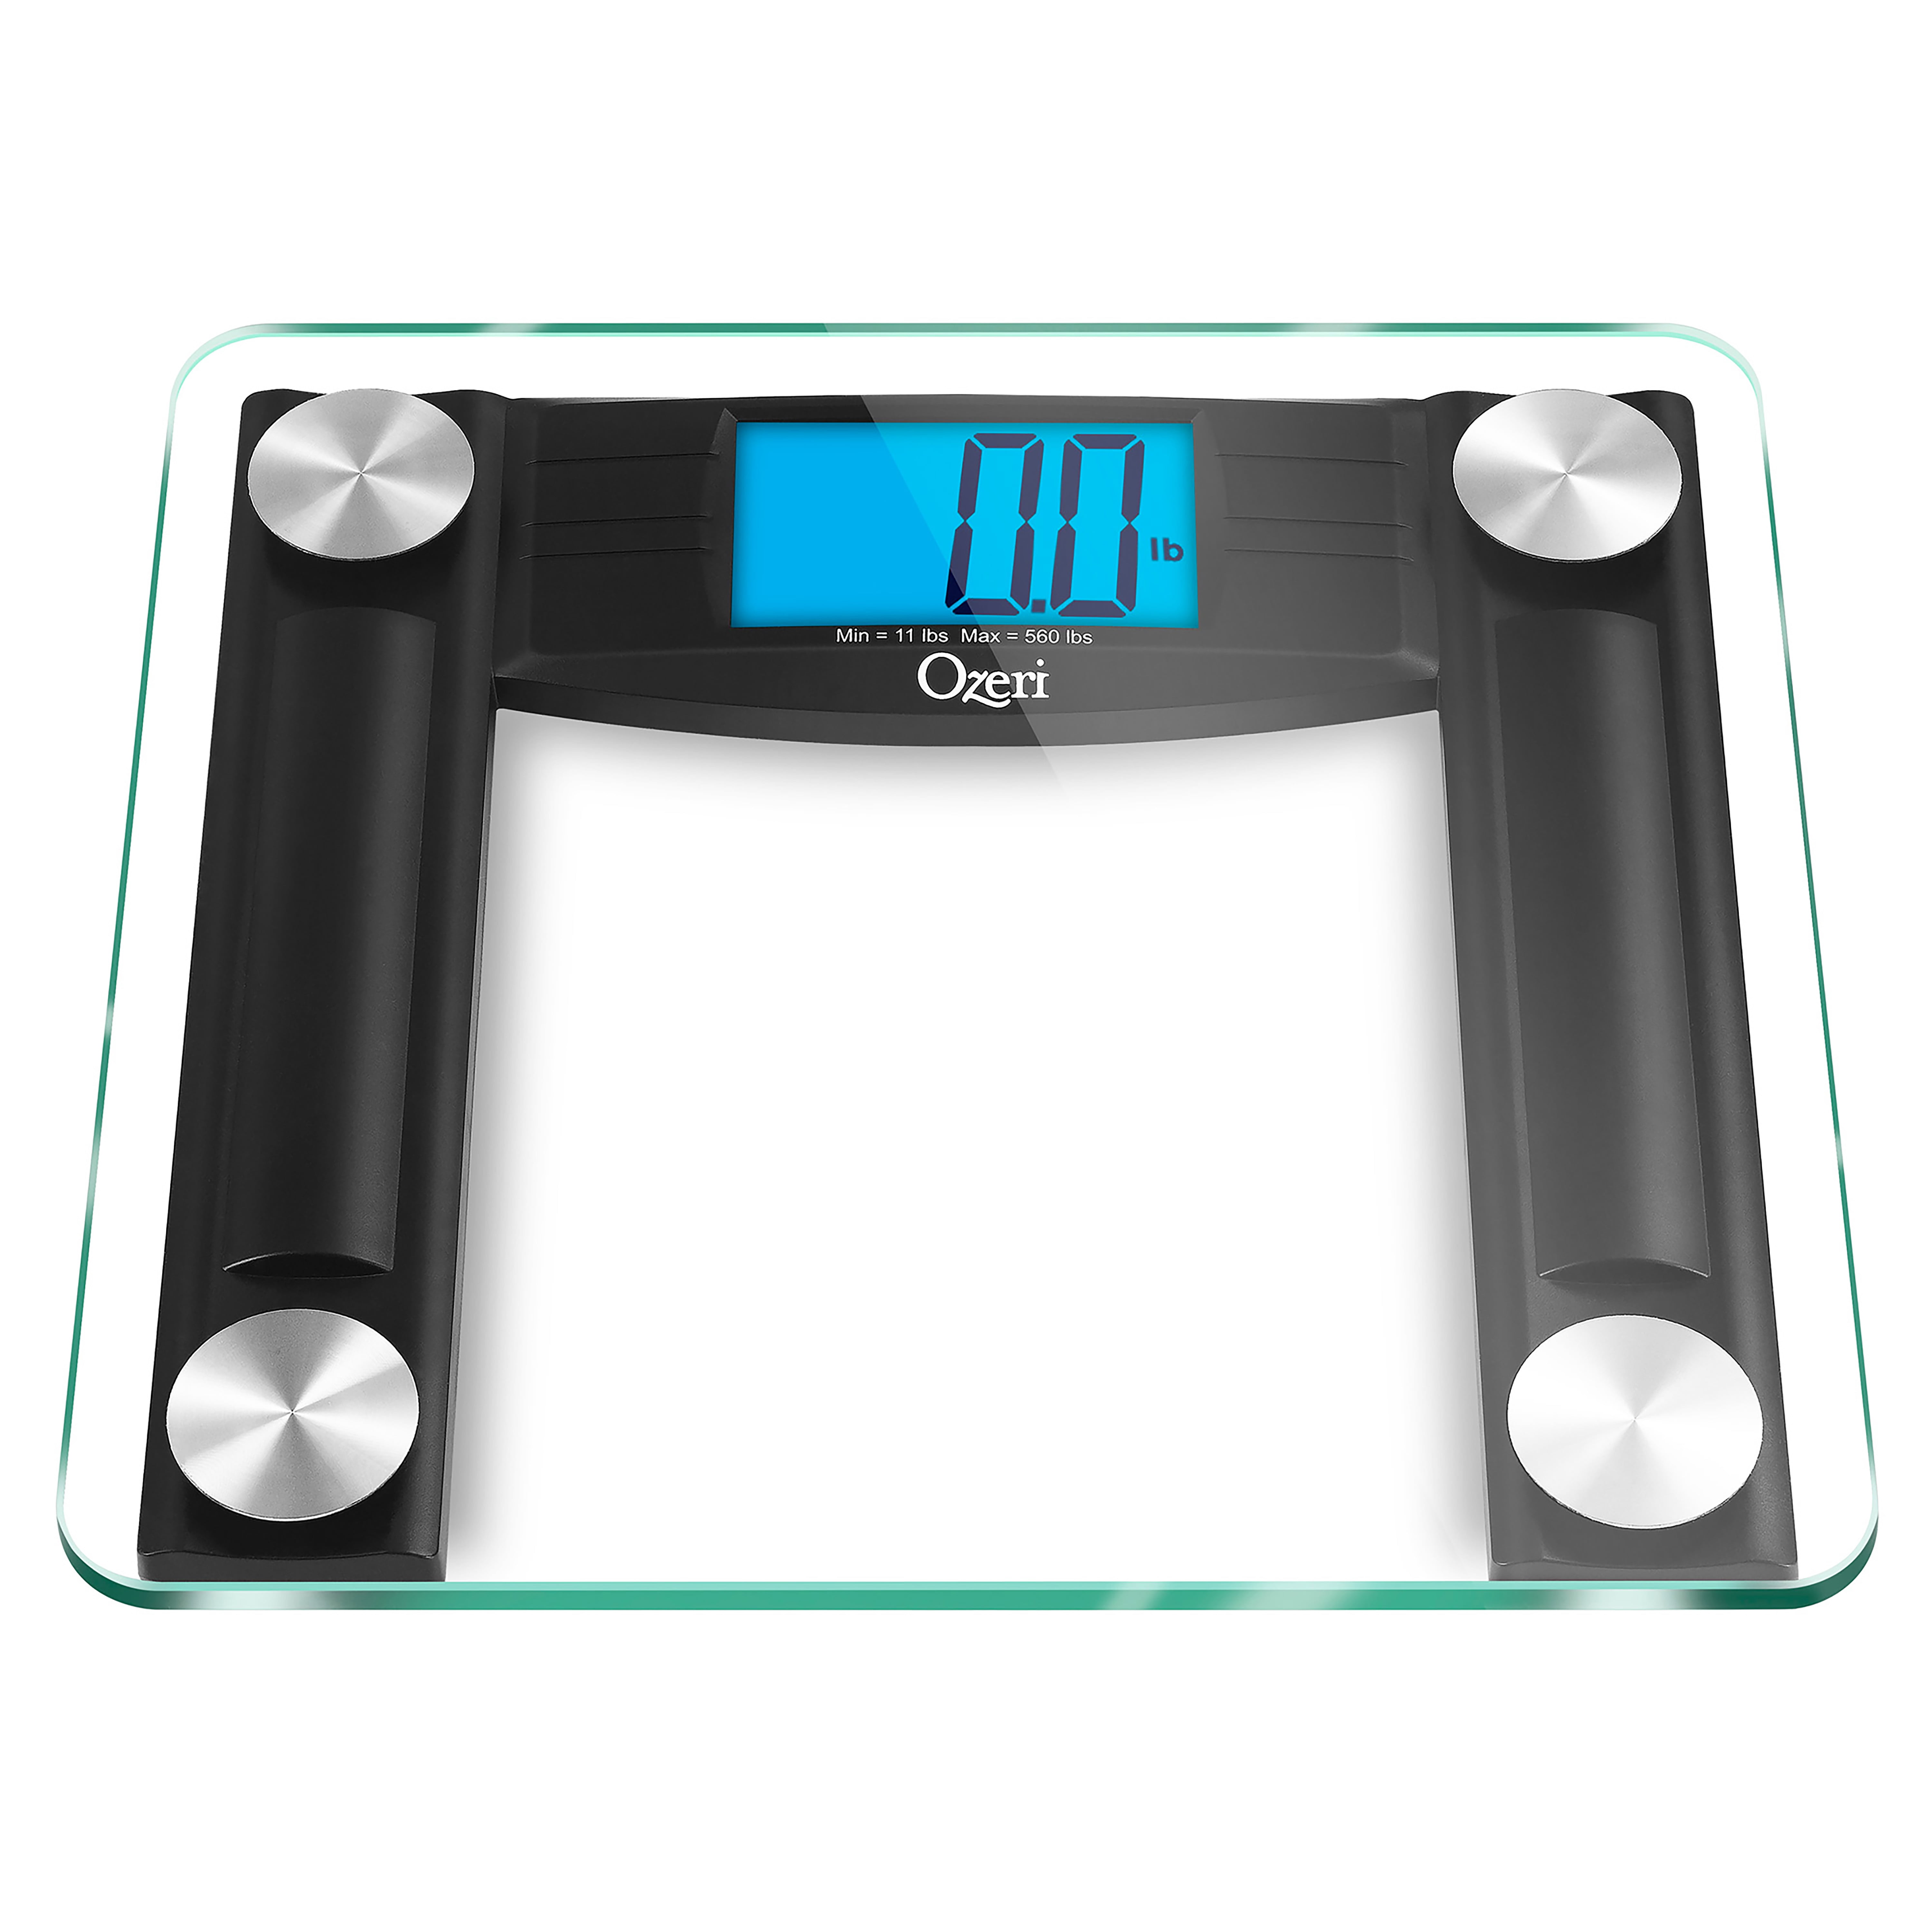 Asligtco Bathroom Scale 560lbs High Capacity Scale for Body Weight